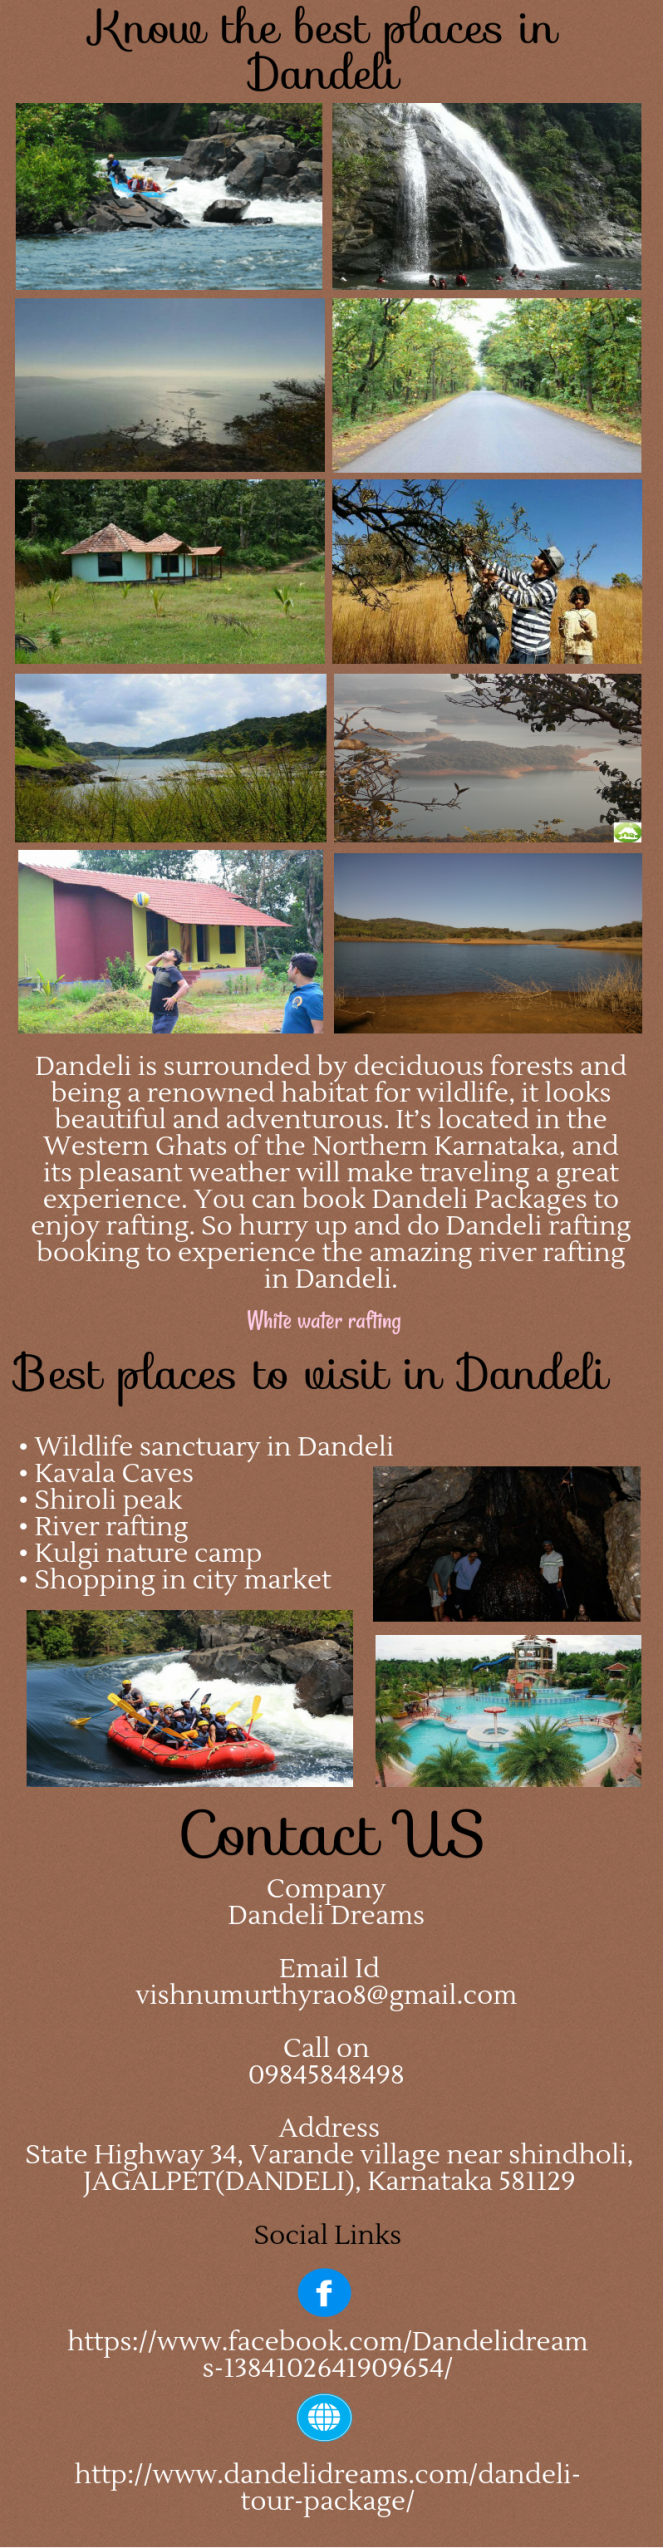 Add best places in your list to visit before in Dandeli